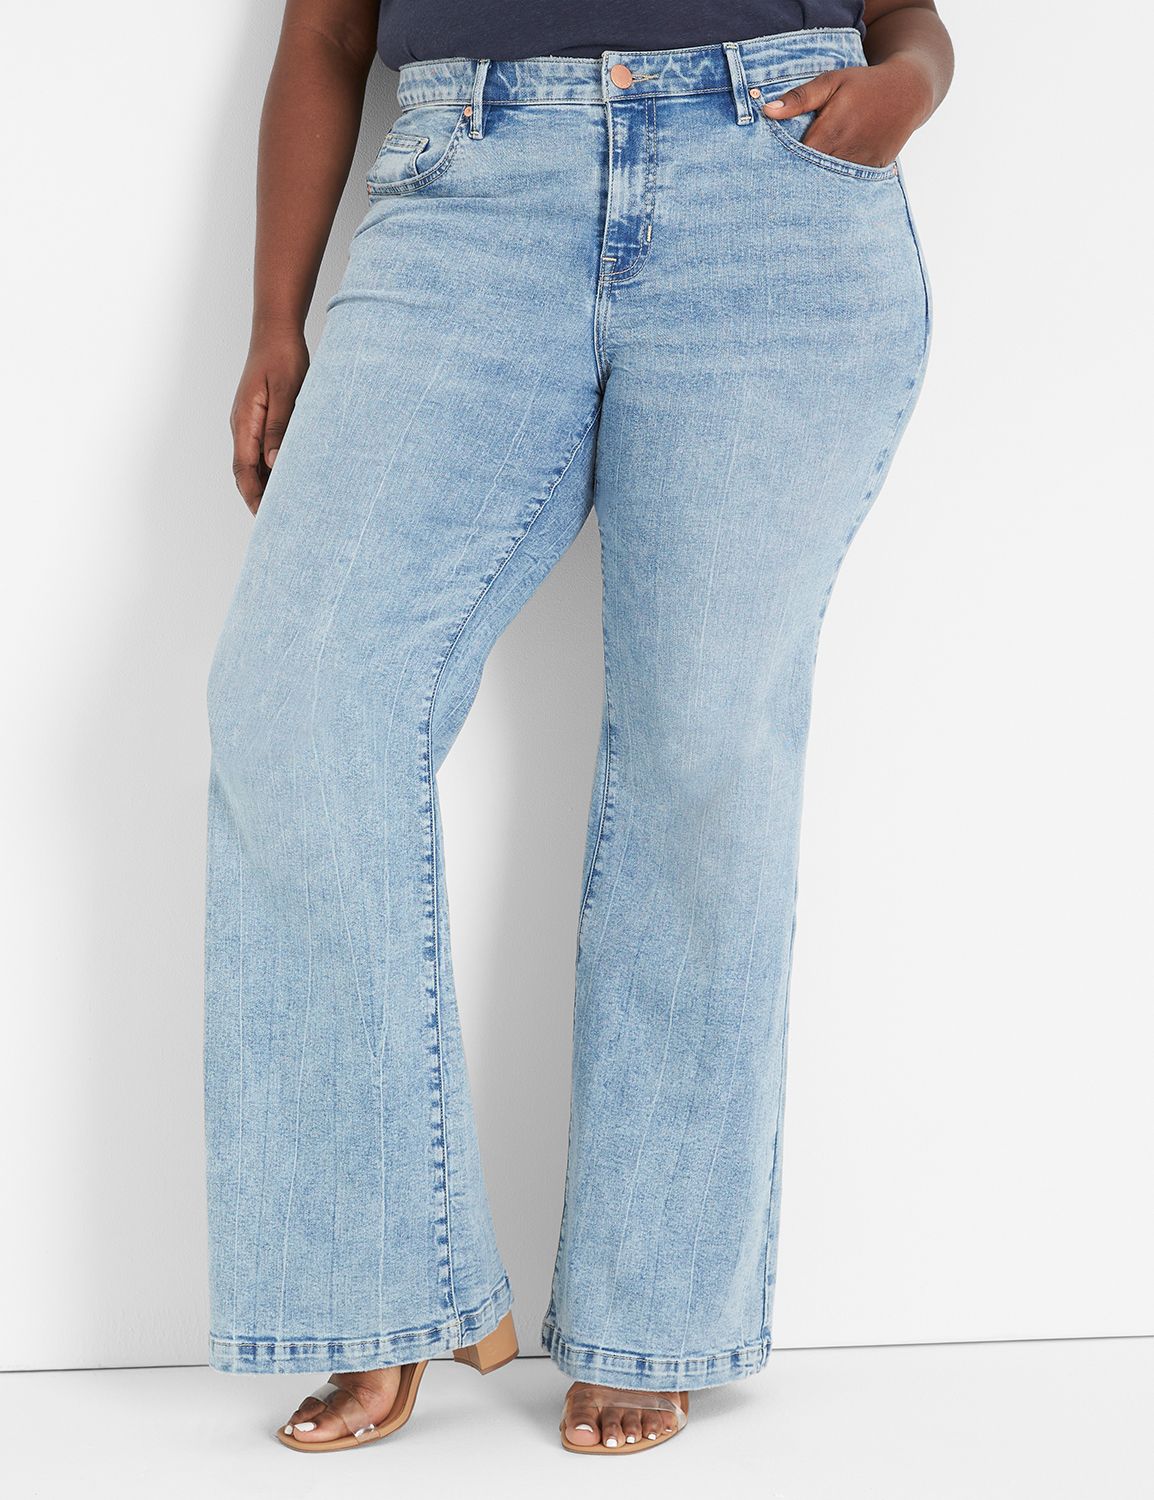 Lane Bryant - Our most comfortable jeans ever! (Featuring the new FLEX Magic  Waistband!) Shop